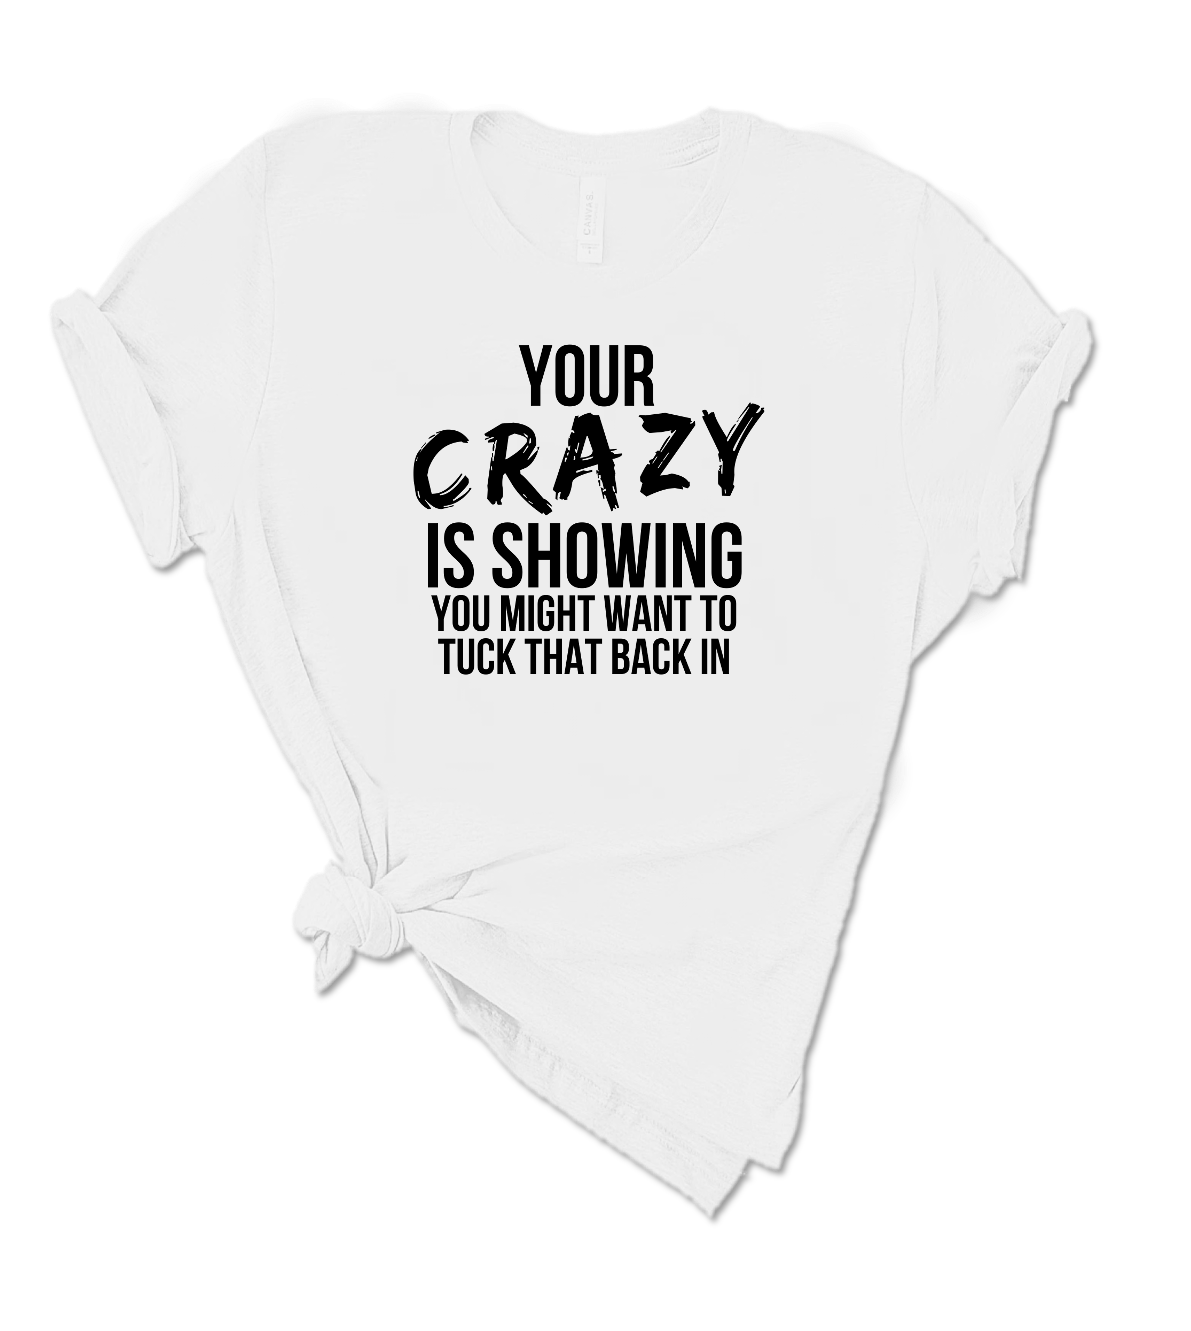 YOUR CRAZY IS SHOWING